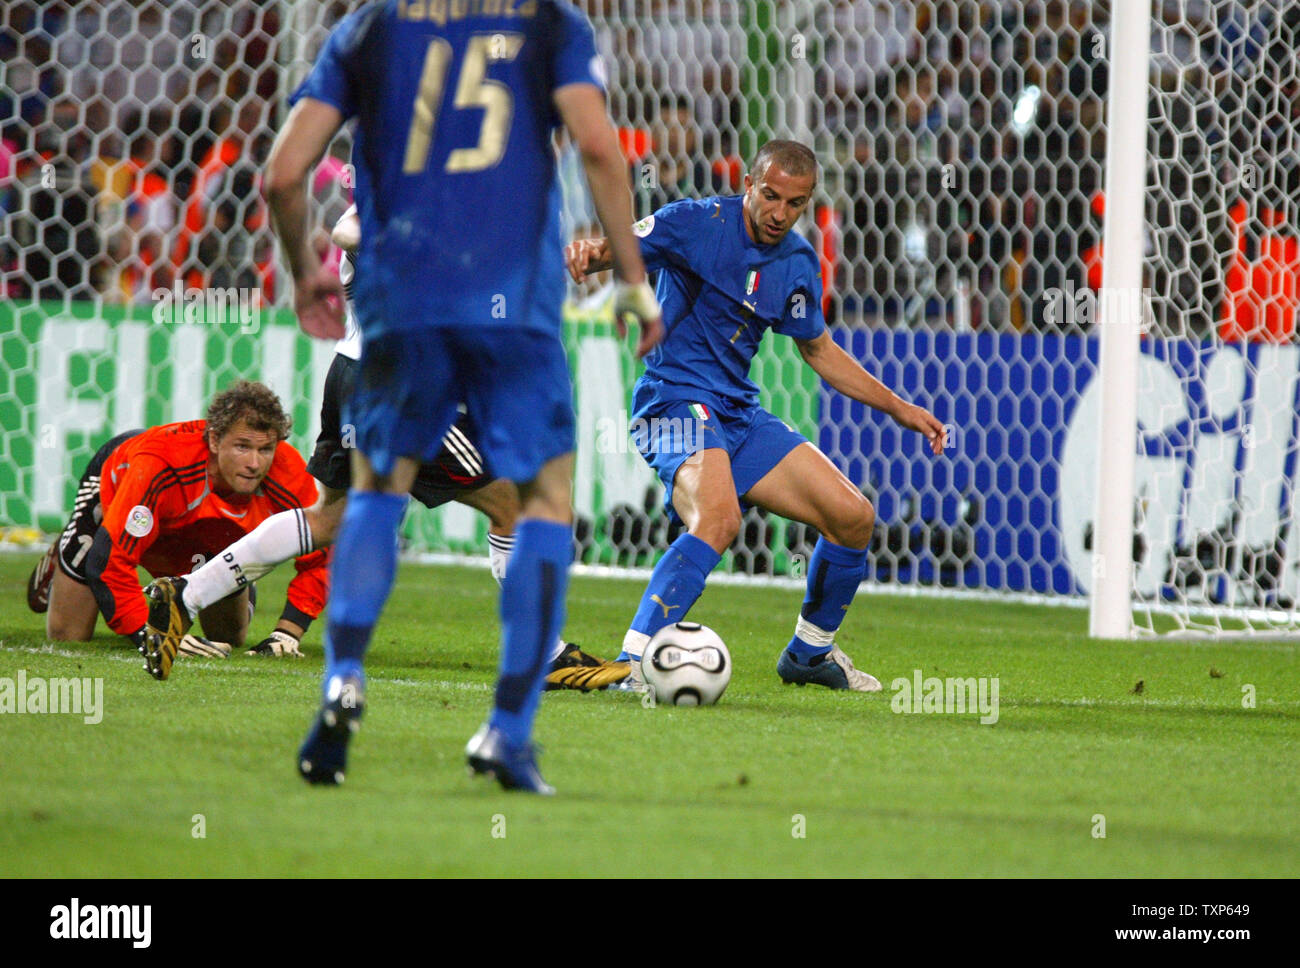 Alessandro Del Piero of Italy (7) beats German keeper Jens Lehmann during World Cup soccer in Dortmund, Germany on July 4, 2006.  Italy defeated Germany 2-0.   (UPI Photo/Arthur Thill) Stock Photo